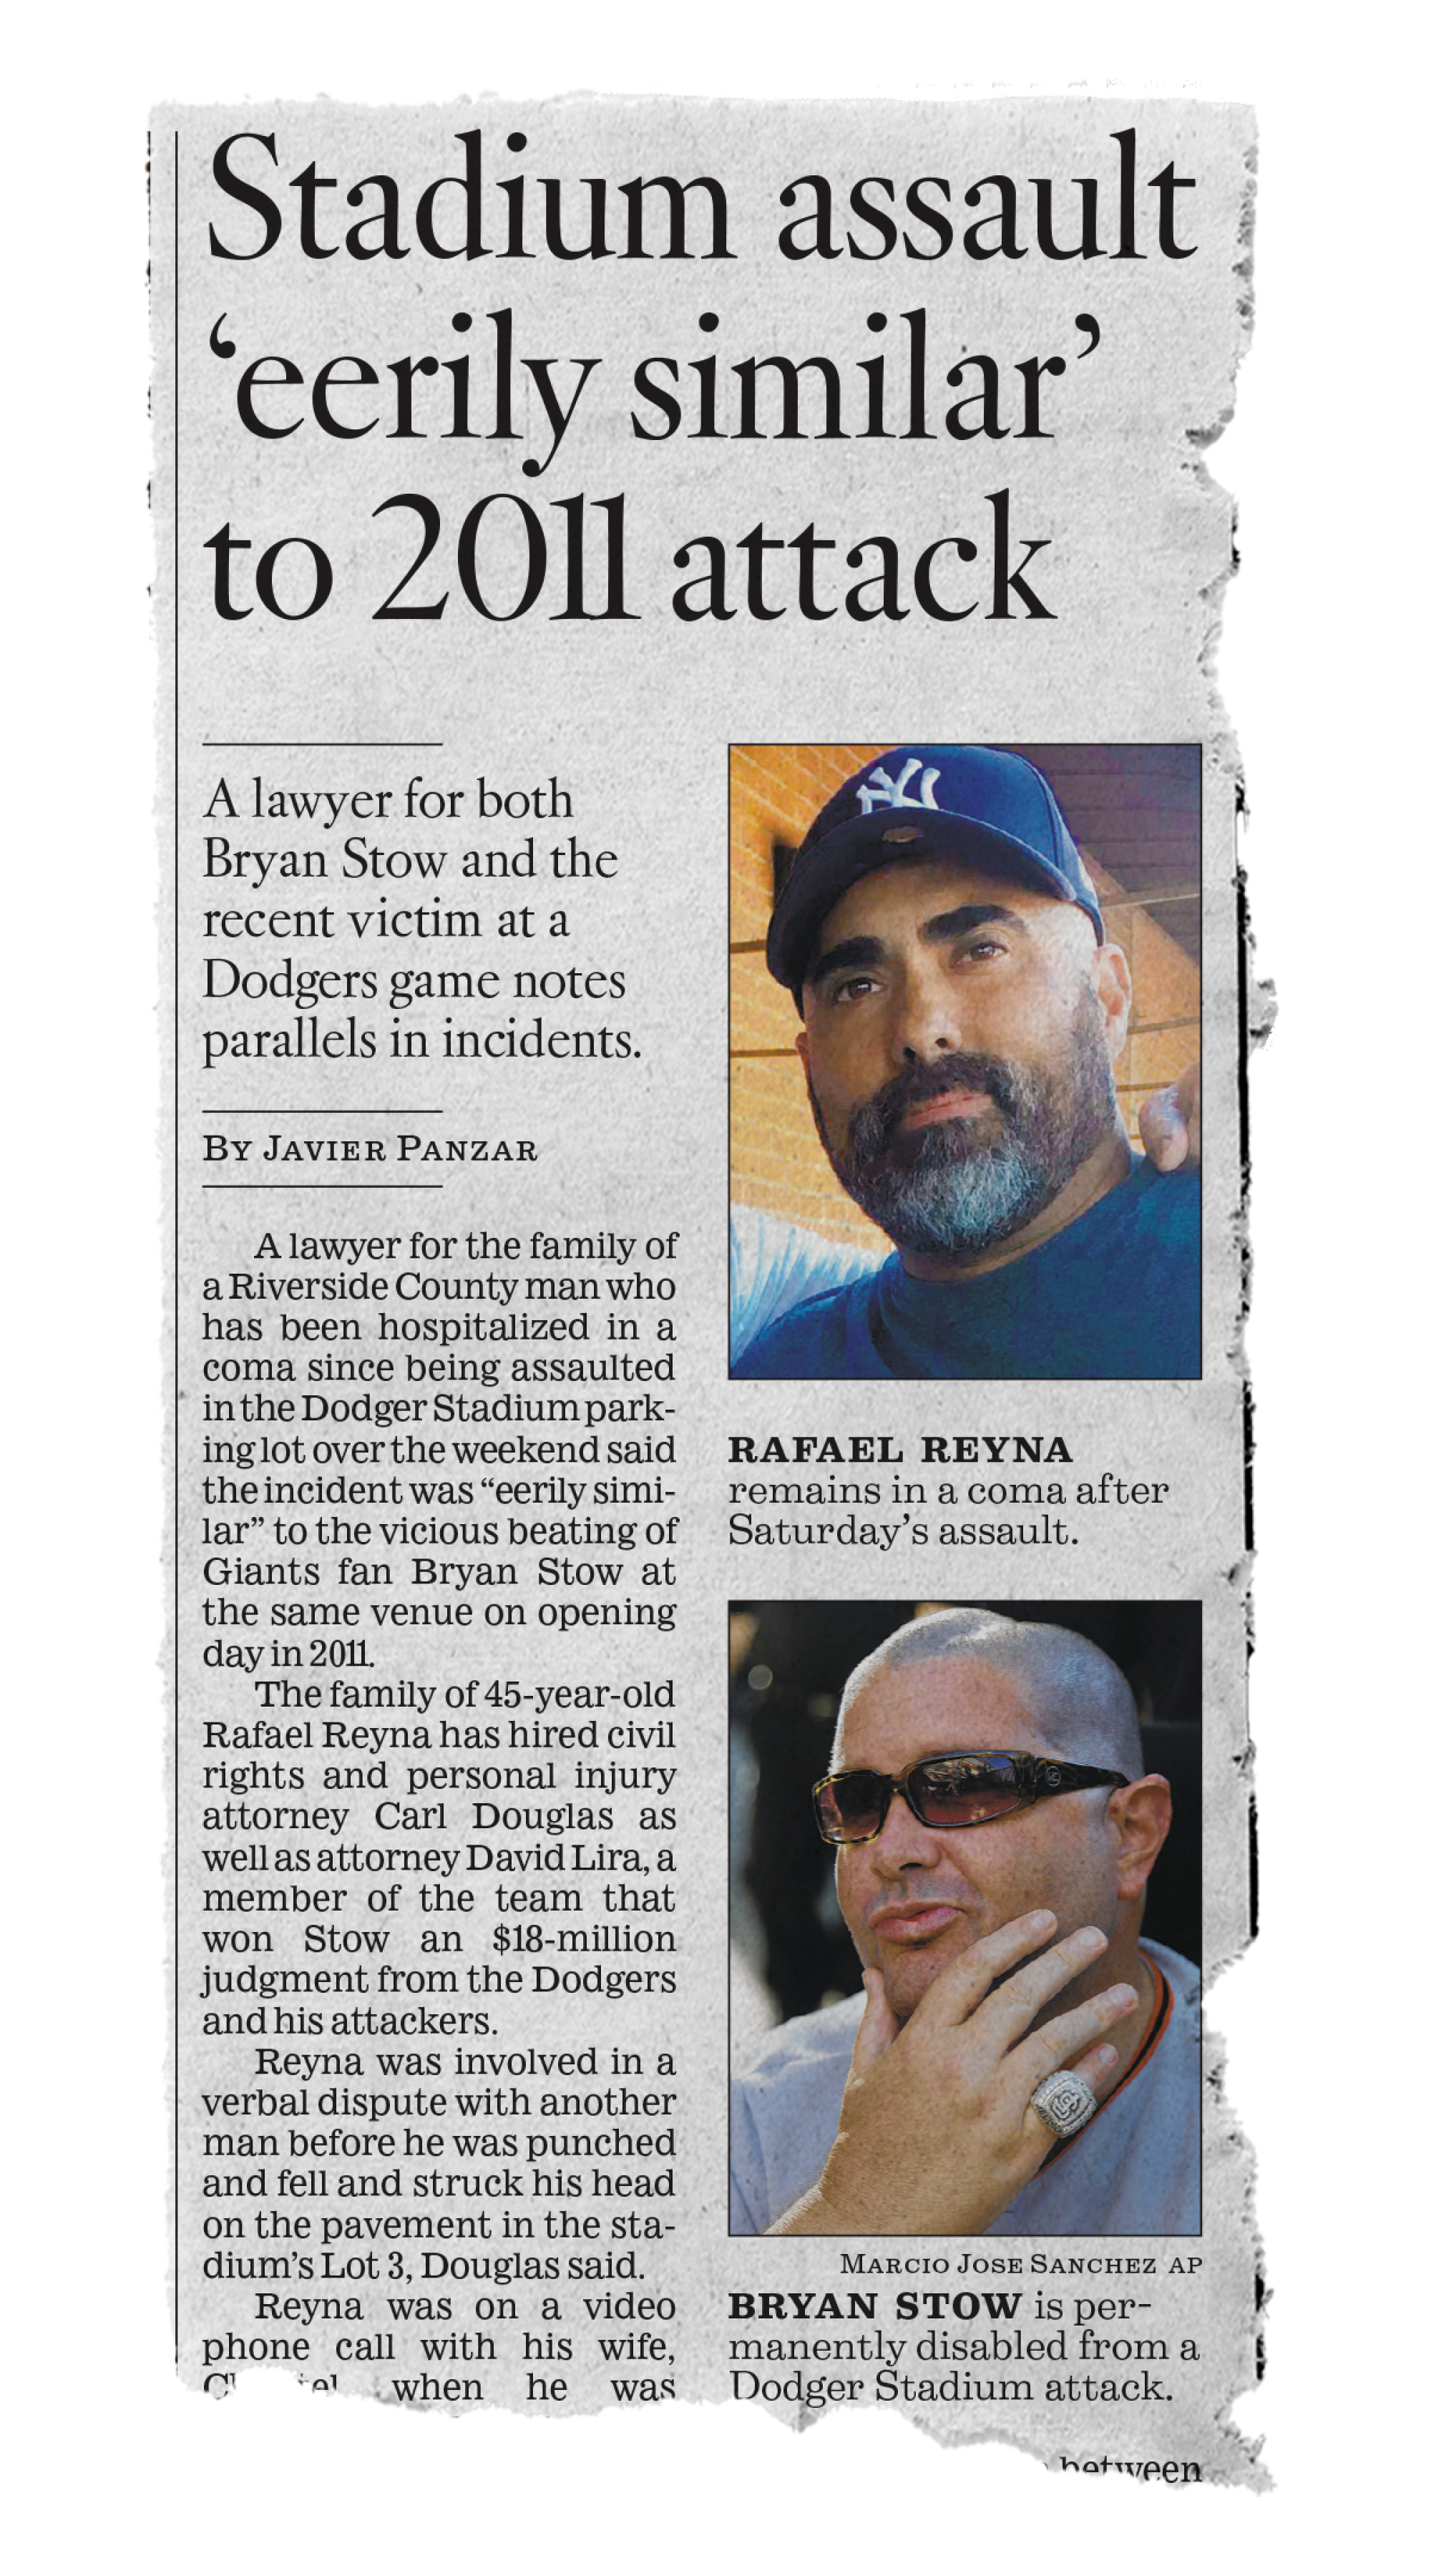 A newspaper clipping for an old story, with the headline "Stadium assault 'eerily similar' to 2011 attack